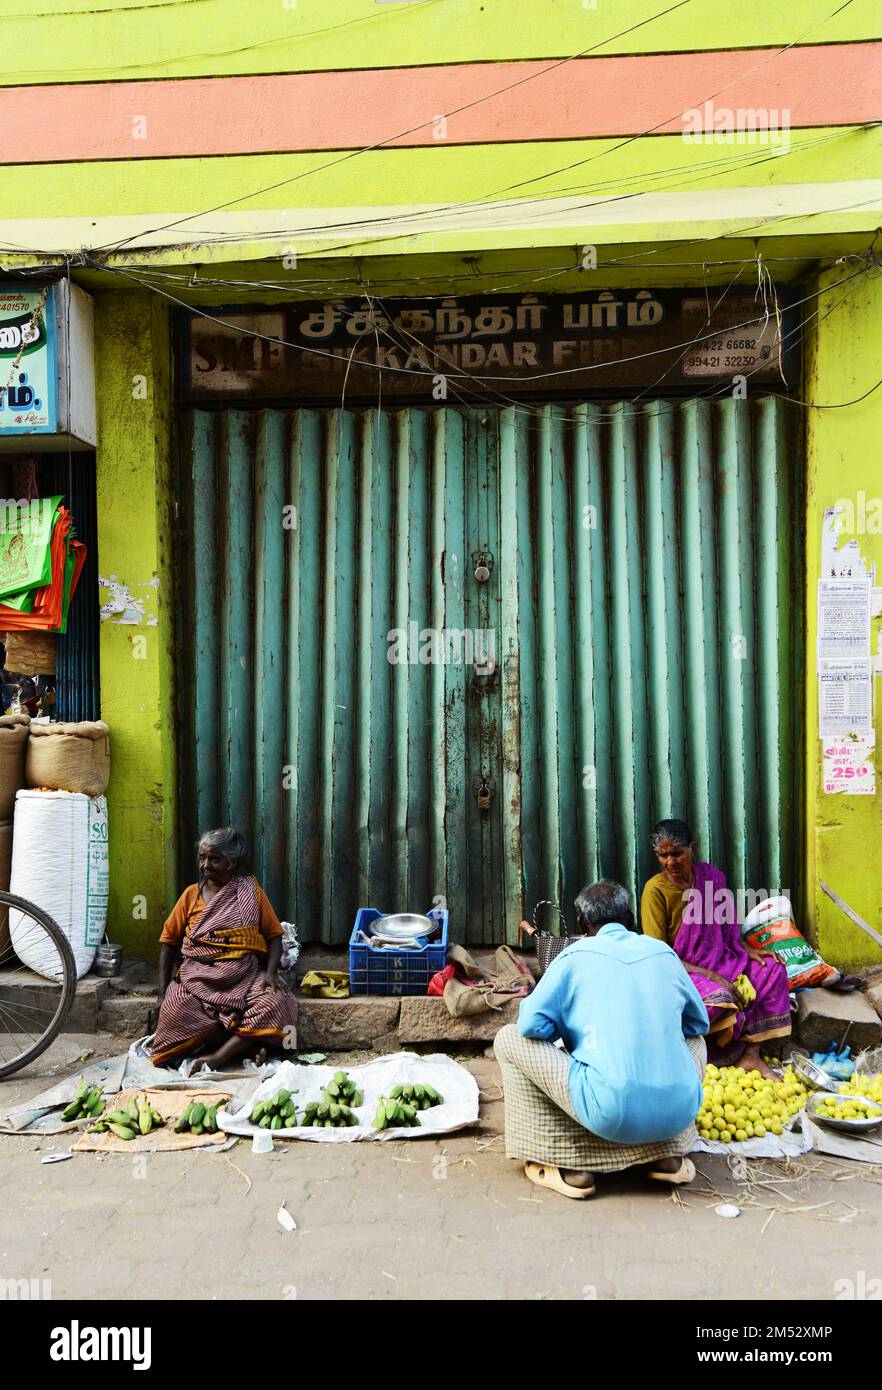 Tamil women selling bananas, Plantains and limes at a colorful street market in Madurai, Tamil Nadu, India. Stock Photo